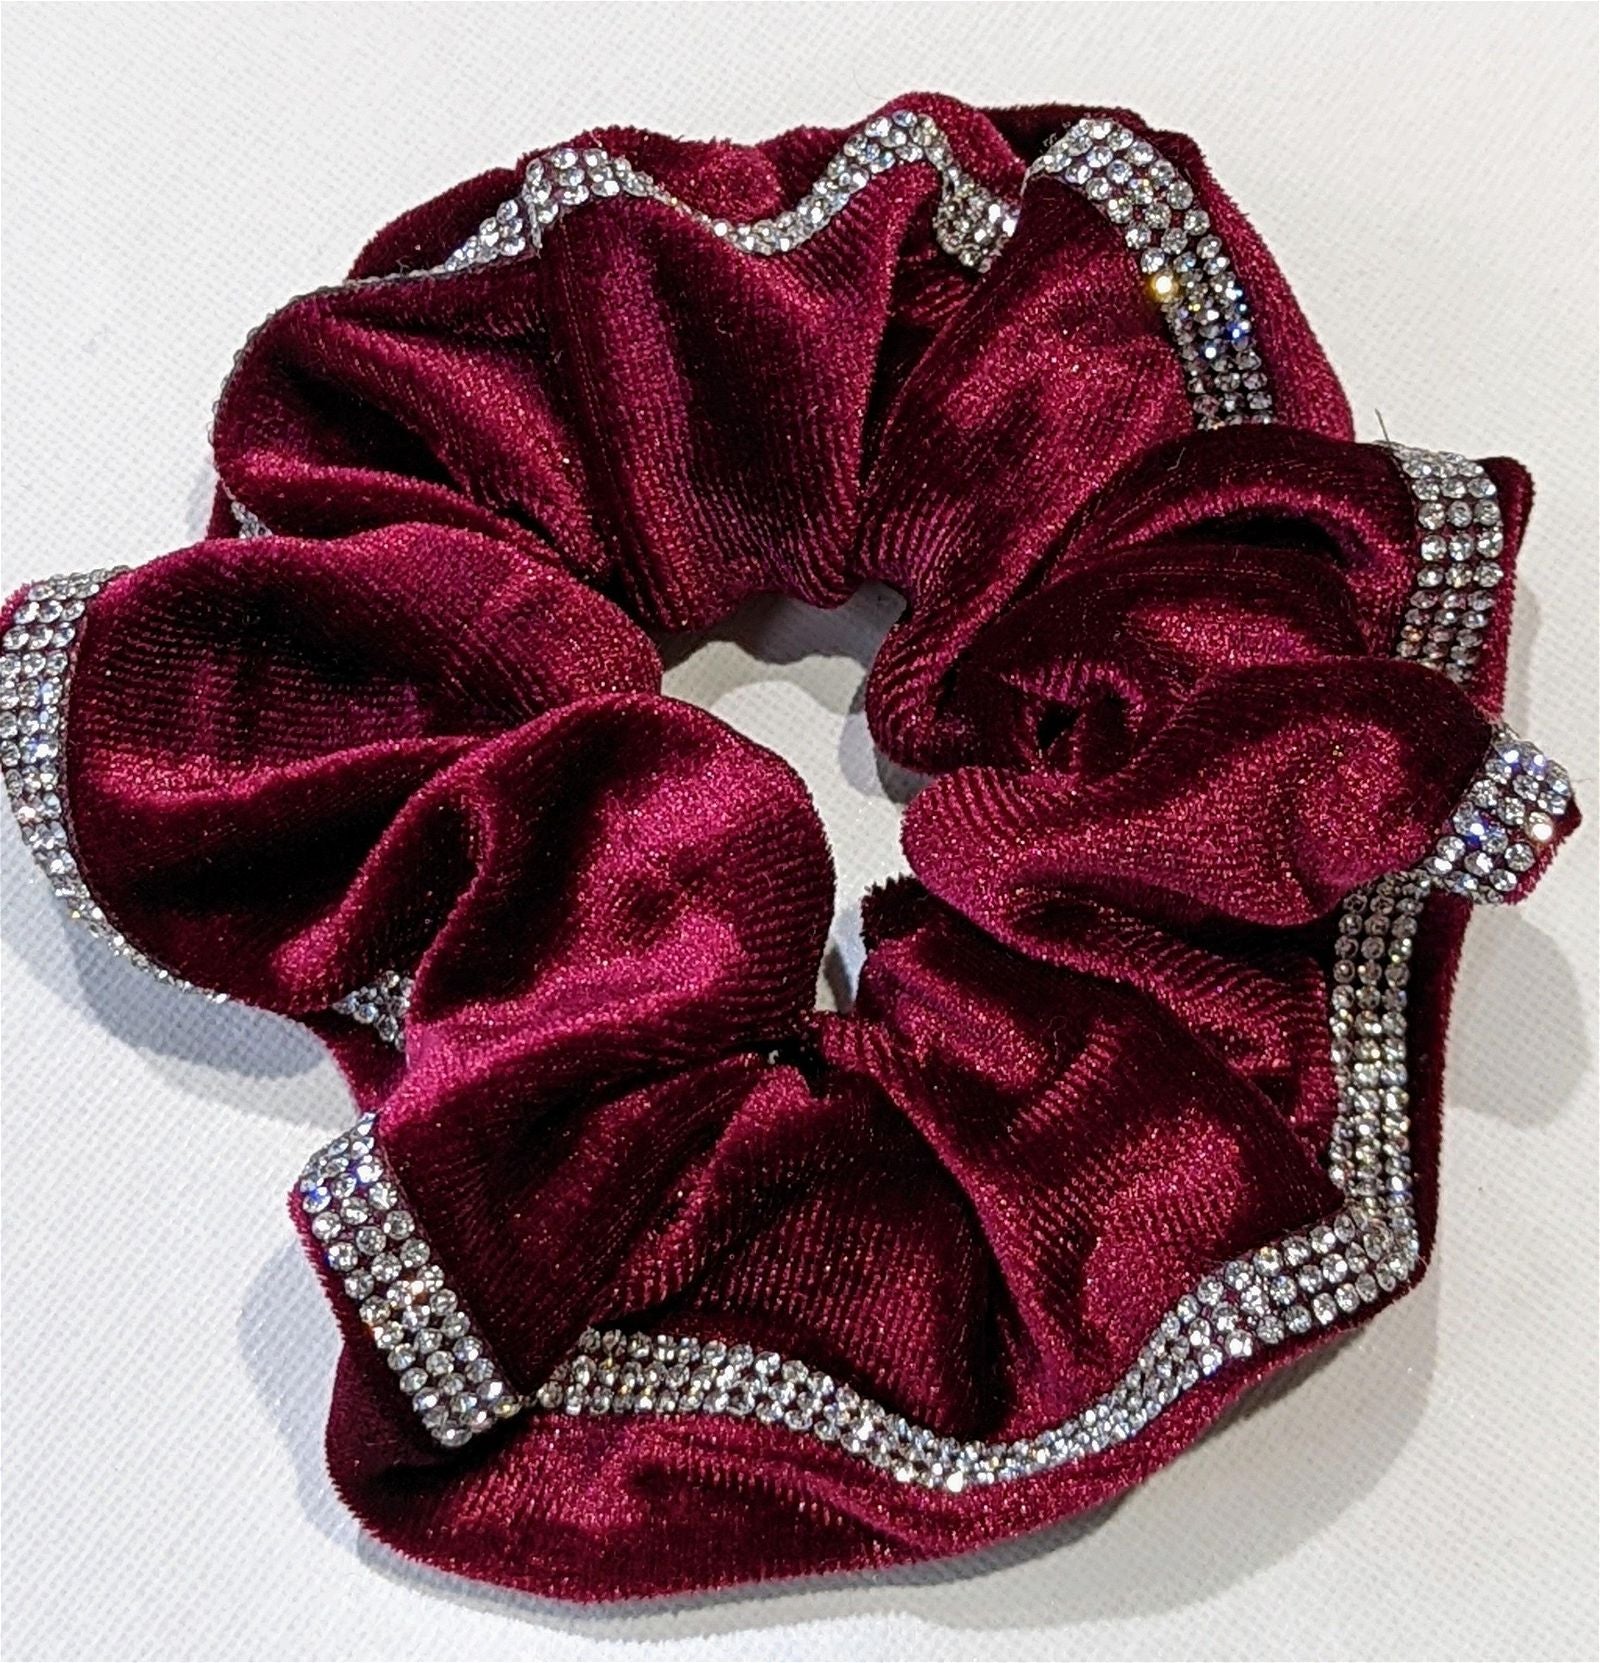 The Fancy Scrunchie - Maily's Classic Accessories